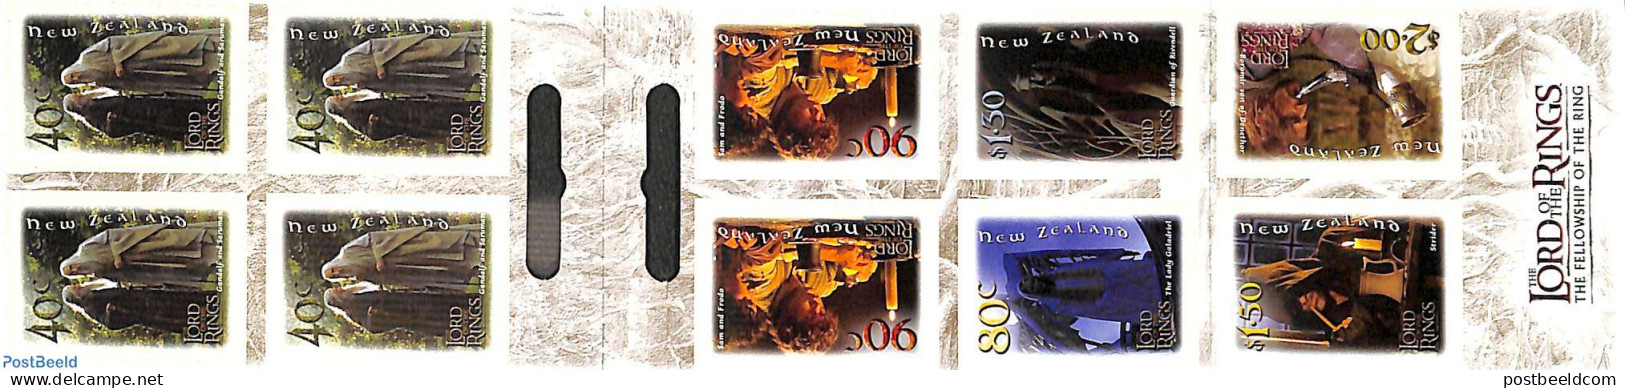 New Zealand 2001 LORD OF THE RINGS BOOKLET, Mint NH, Stamp Booklets - Art - Authors - Photography - Science Fiction - Unused Stamps